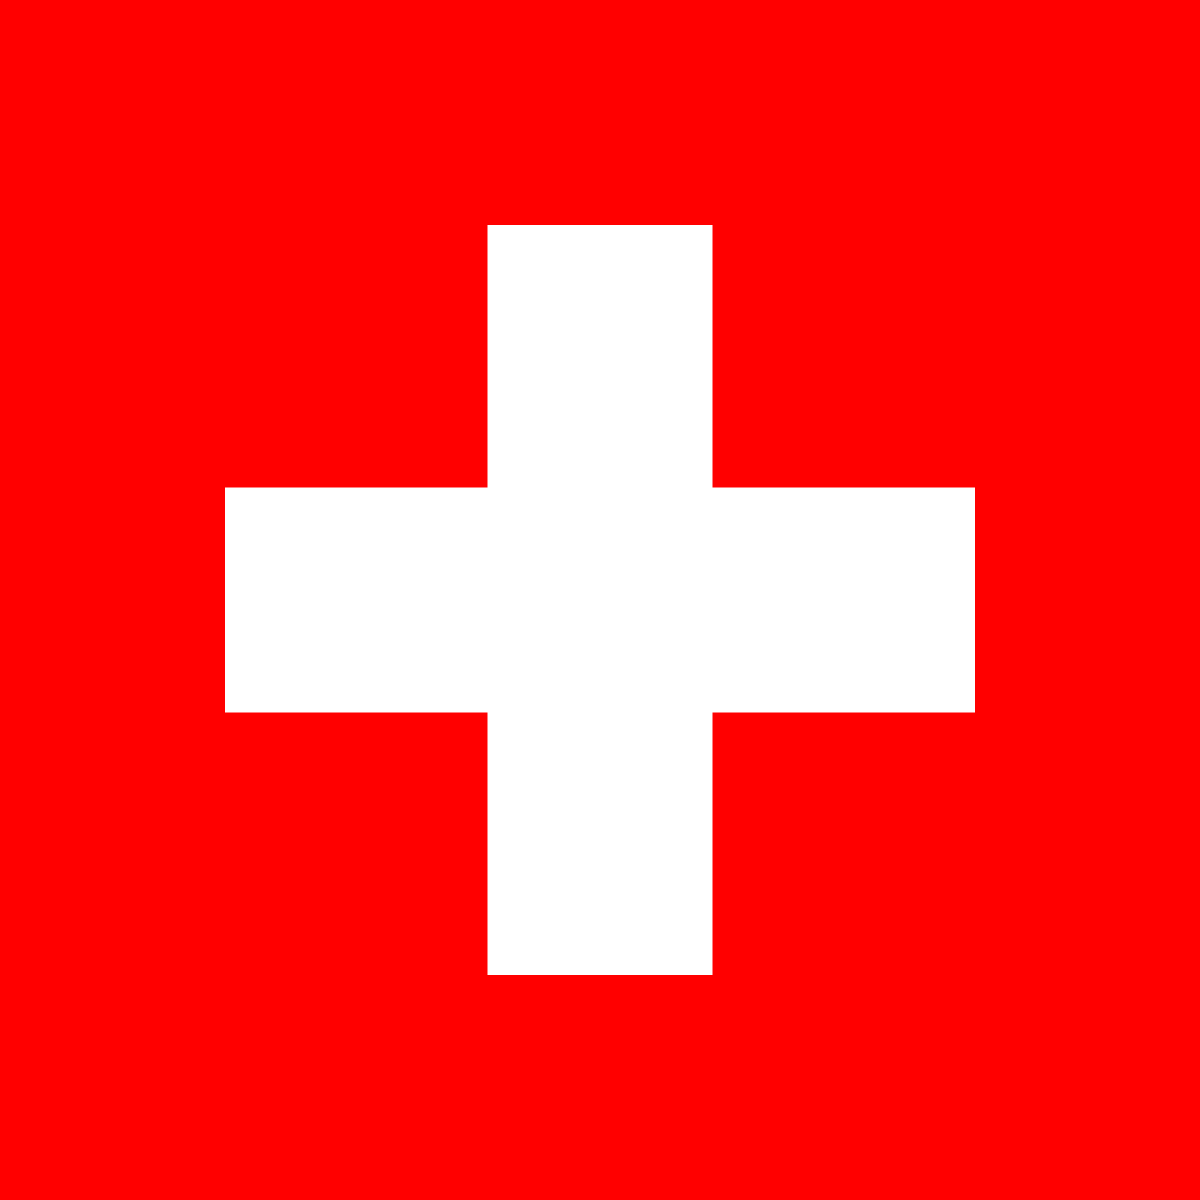 First of all: which one is the flag of Switzerland?